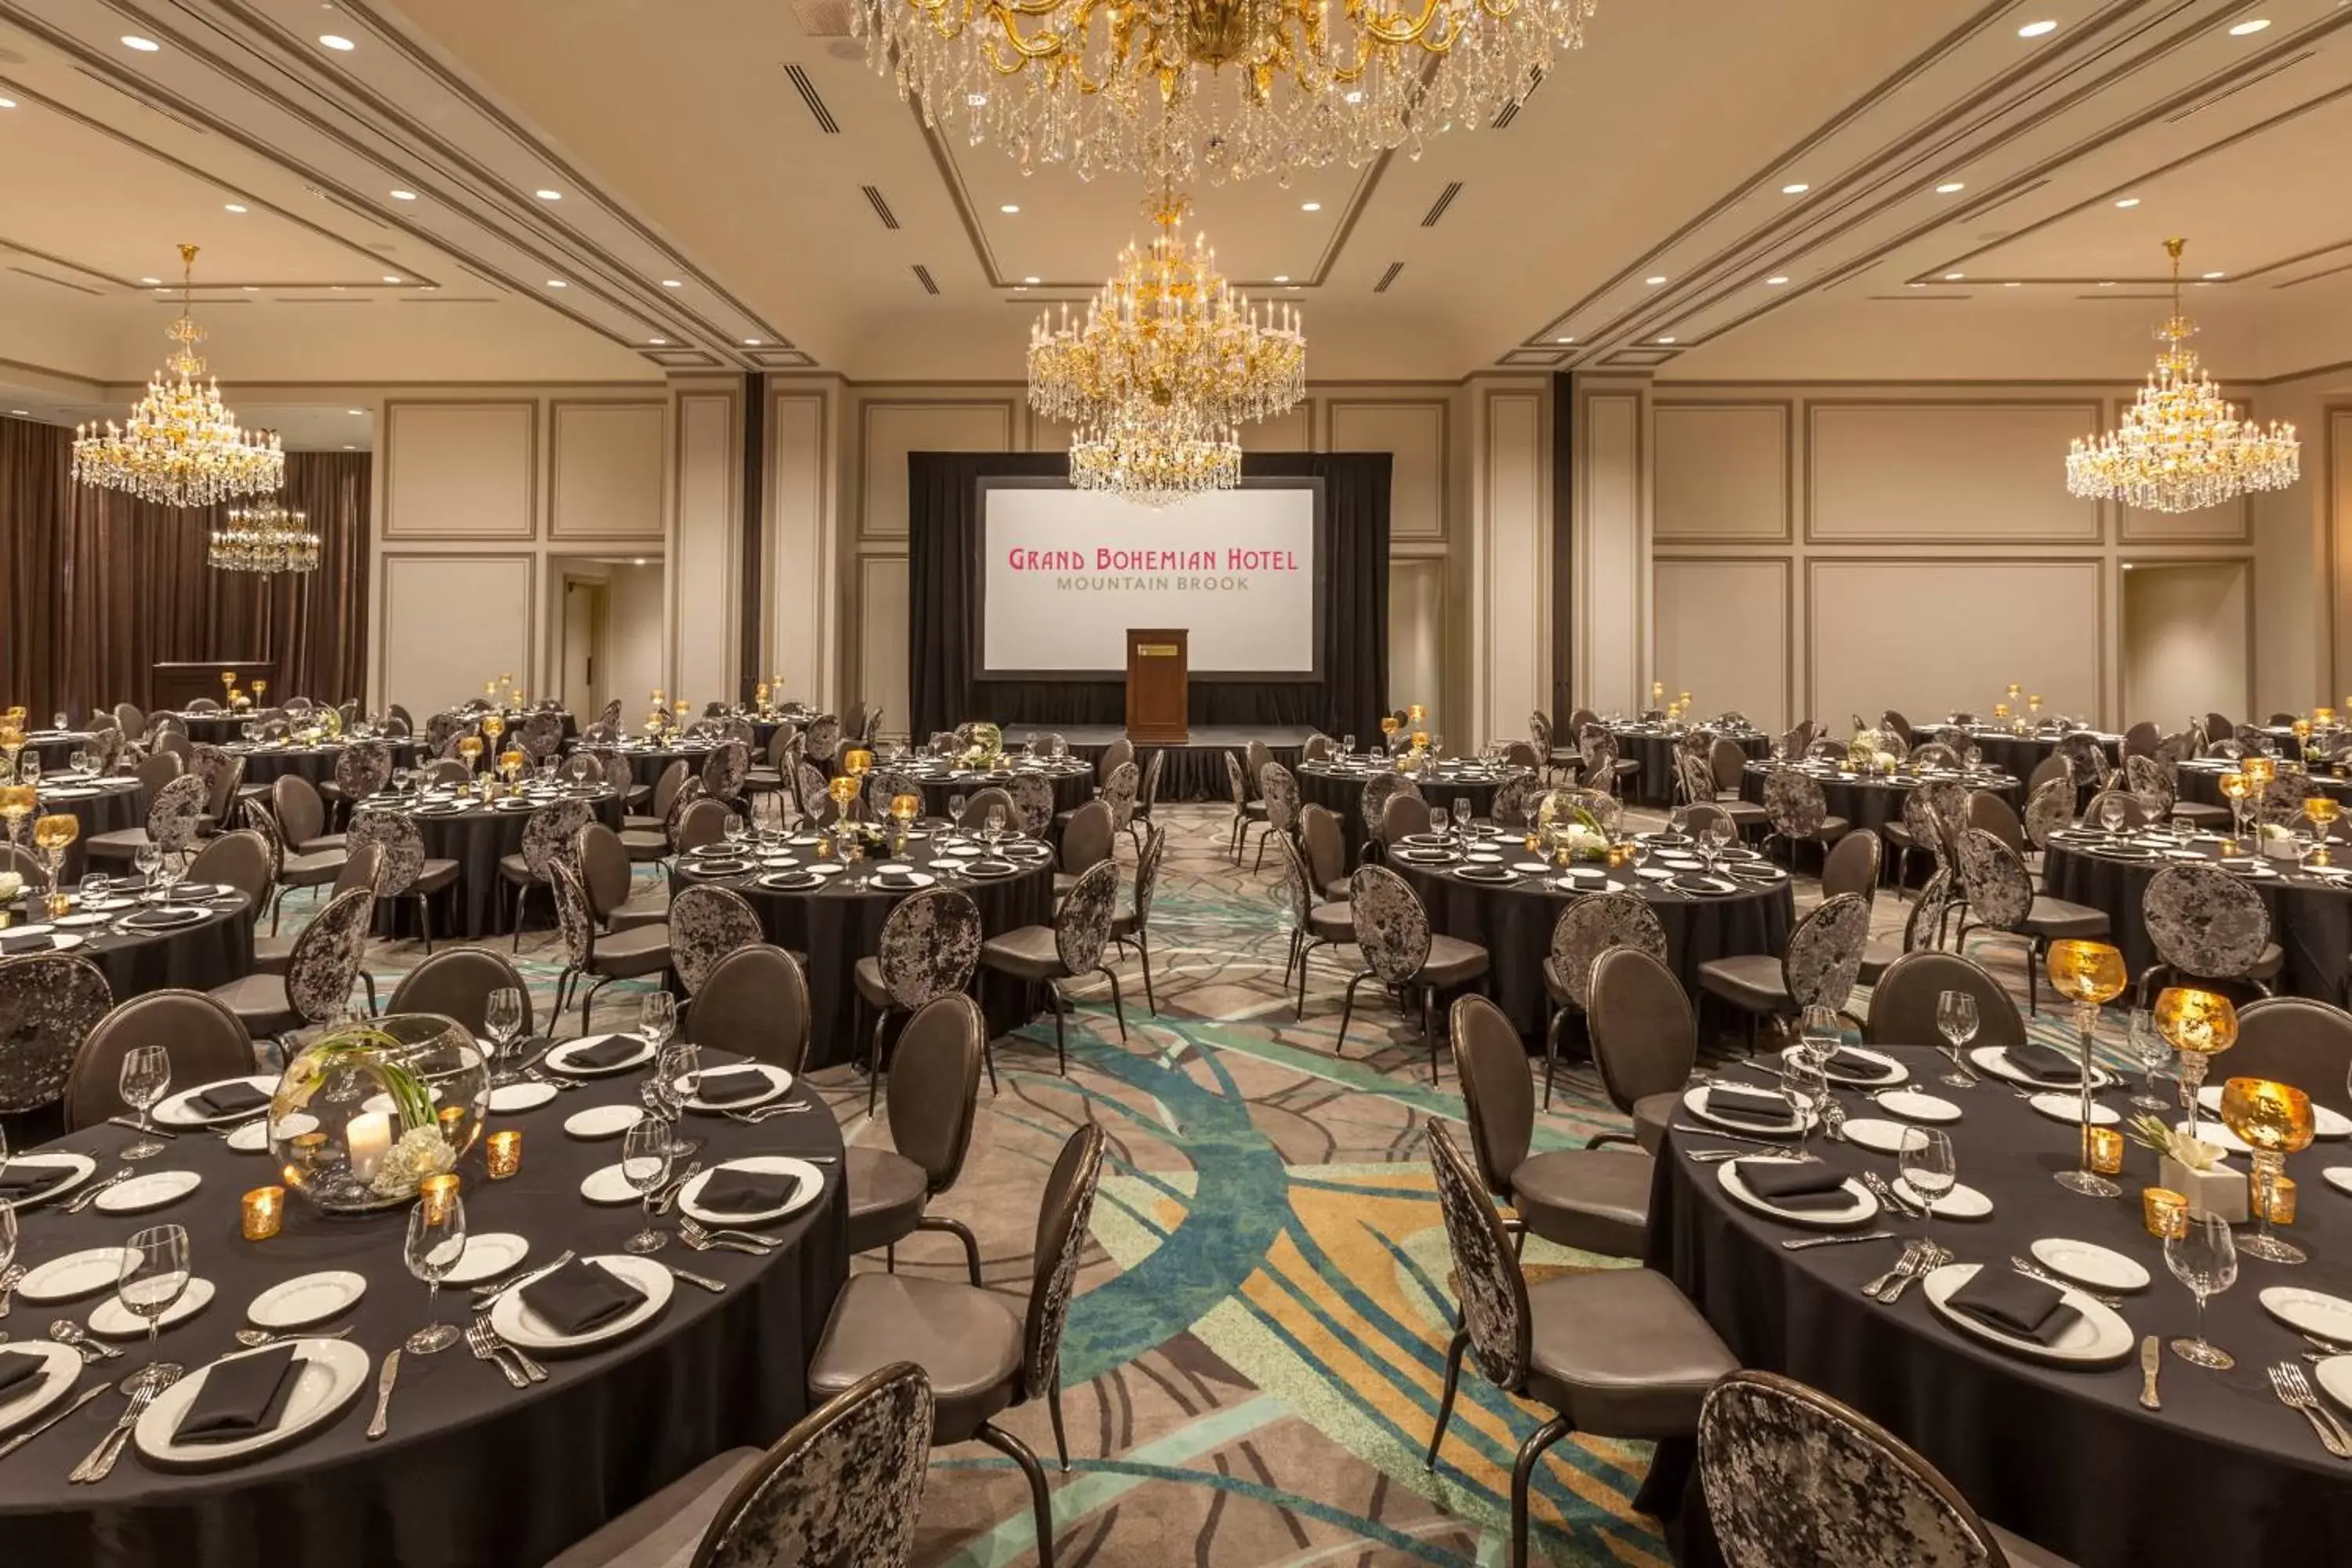 Meeting/conference room, Banquet Facilities in Grand Bohemian Hotel Mountain Brook, Autograph Collection